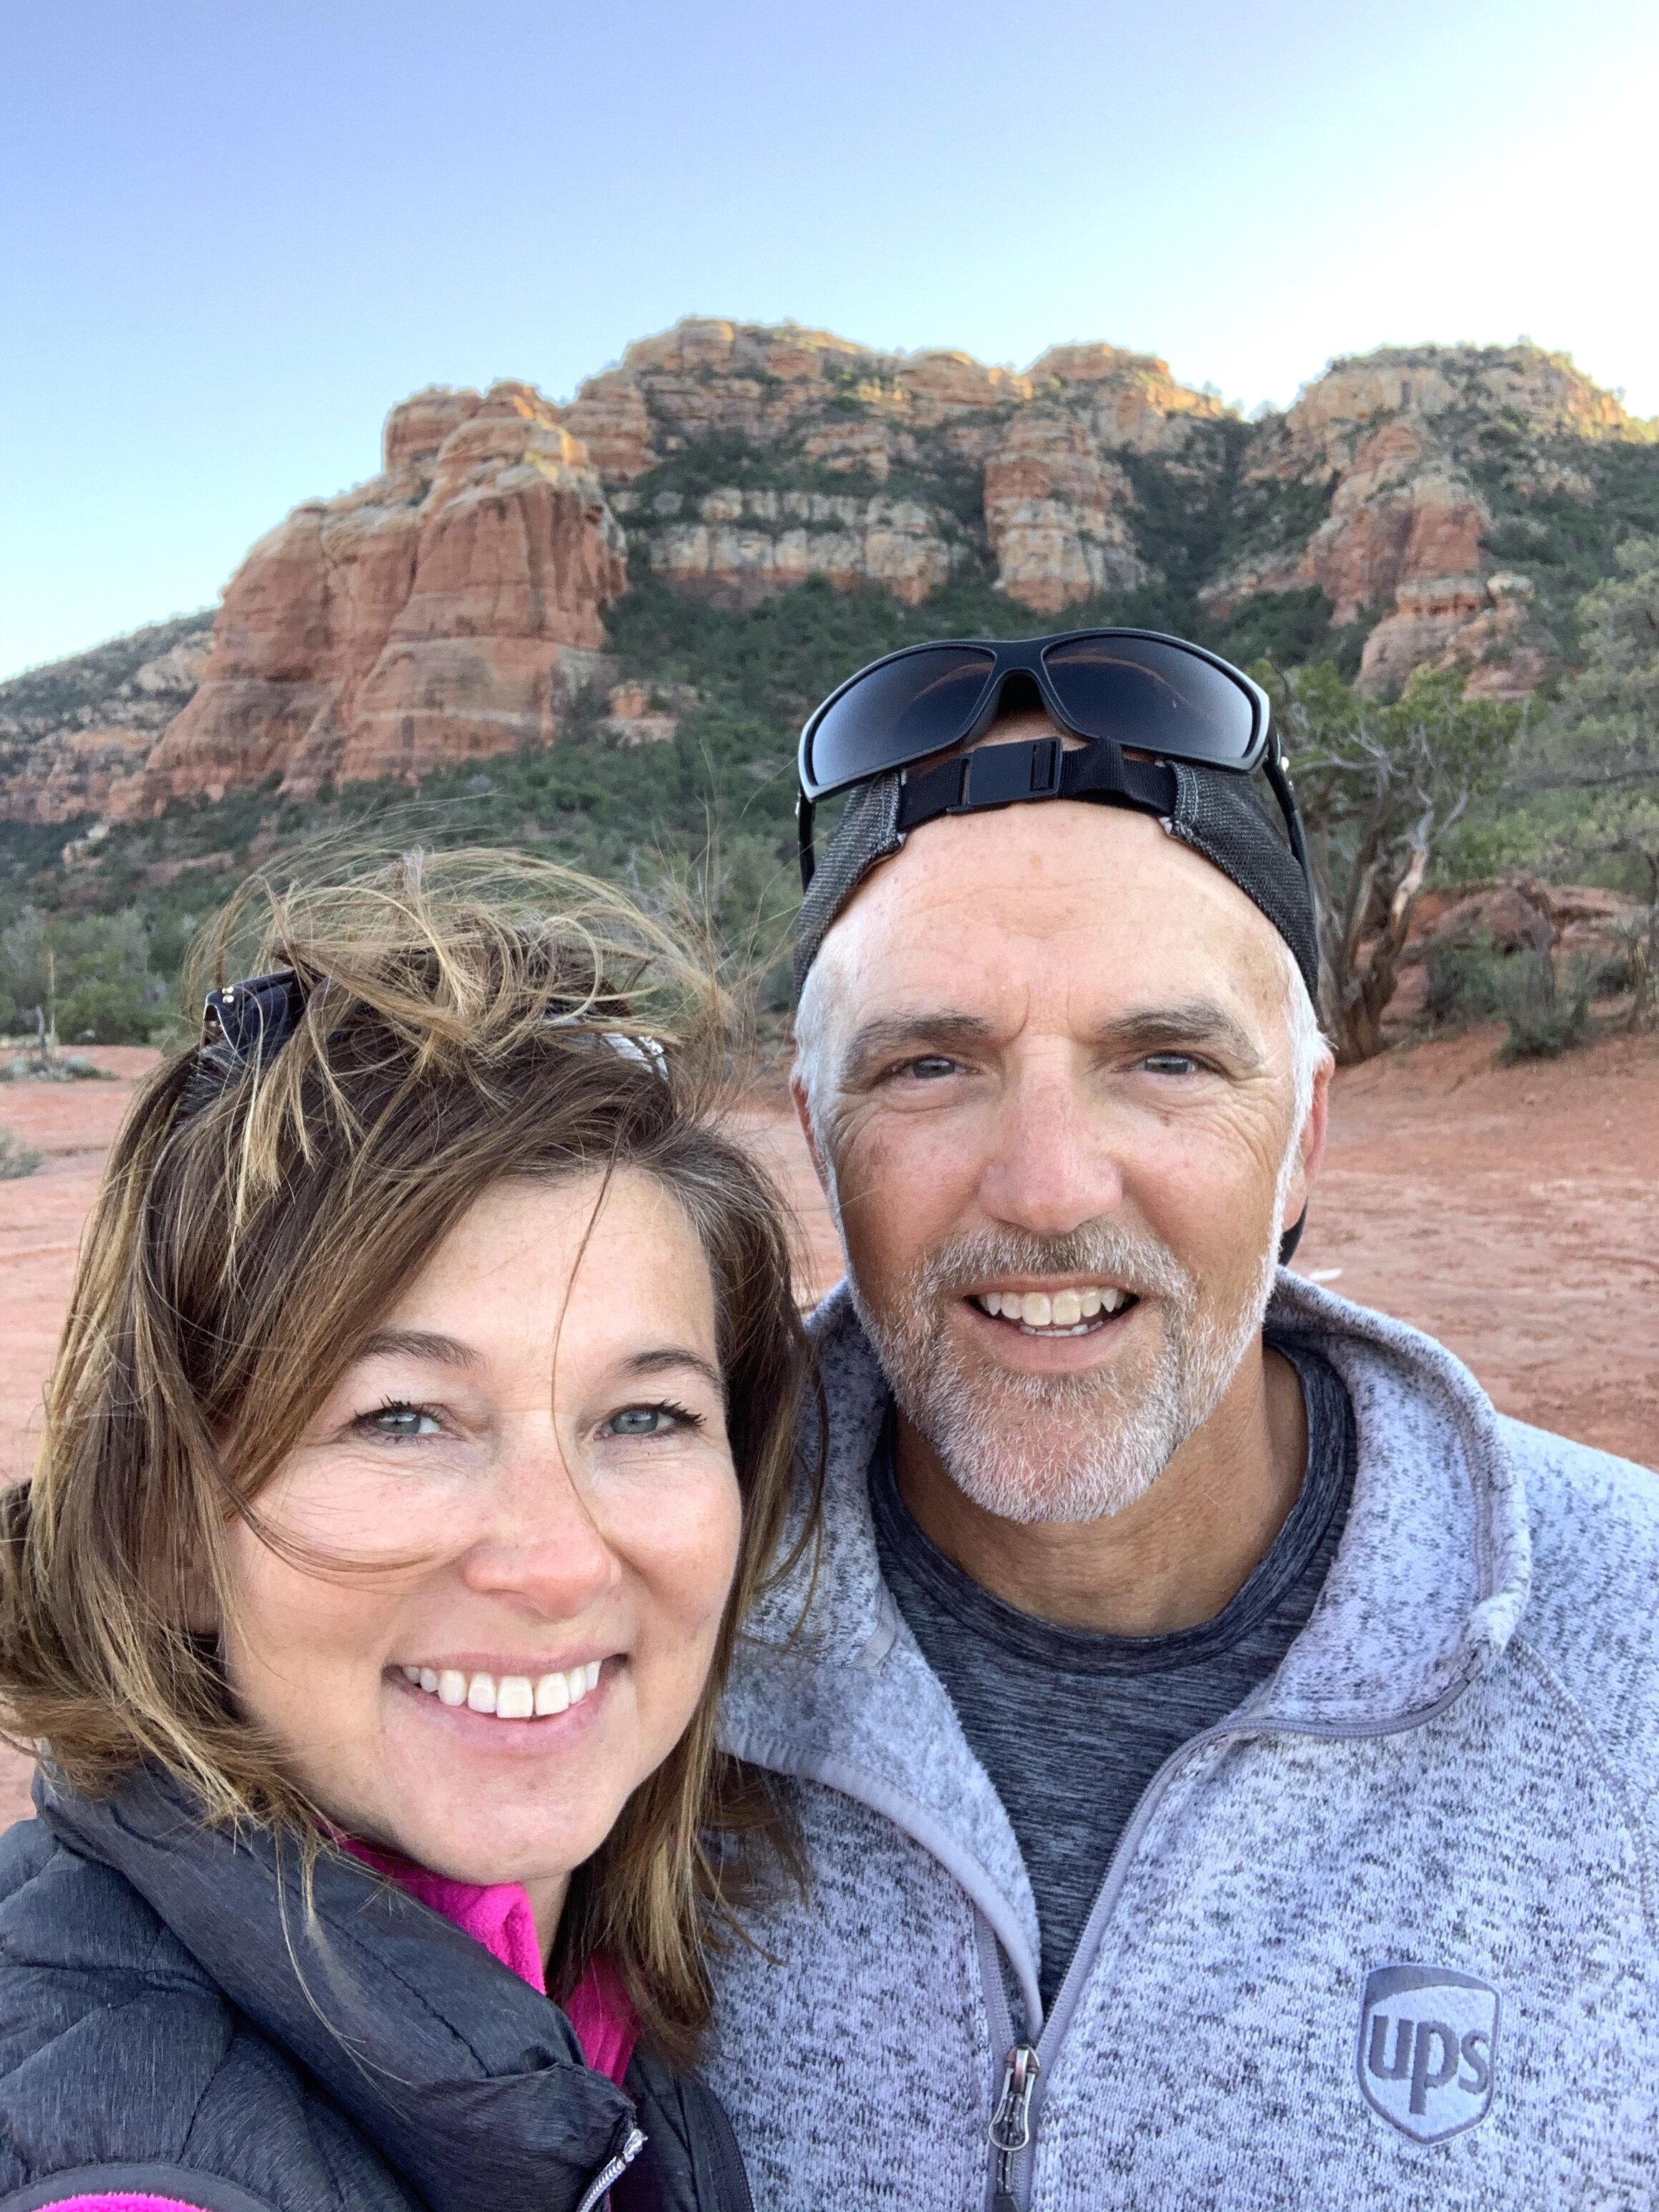  Sedona was our next stop in Arizona—so much diversity in Arizona. The prickly cactus plants  were replaced with an abundance of Juniper trees against a backdrop of red rock mountains—just beautiful. 